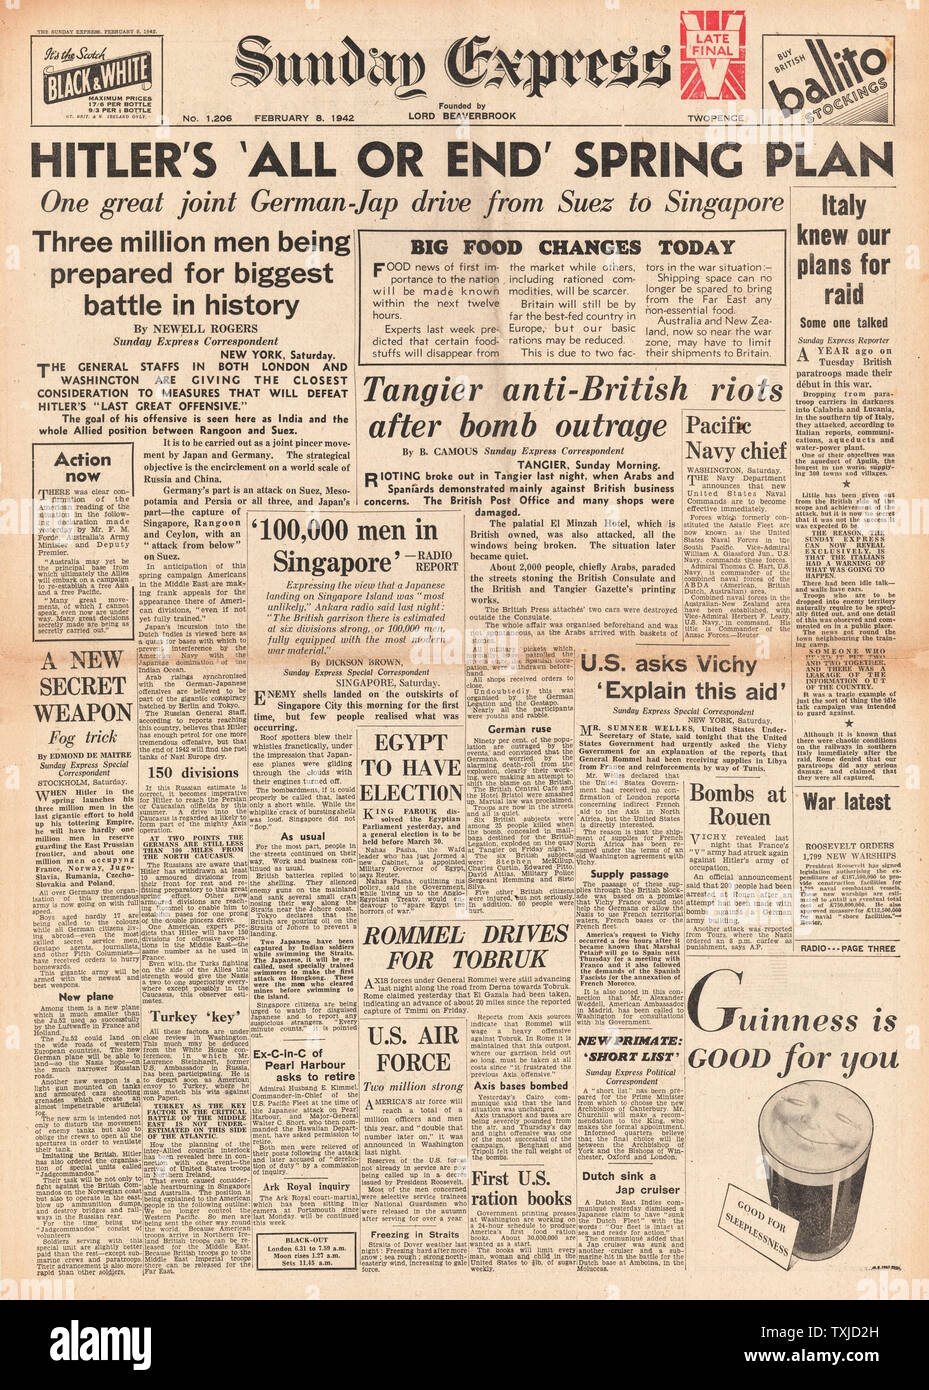 1942 Front page Sunday Express Hitlers Spring Offensive Plan Stockfoto